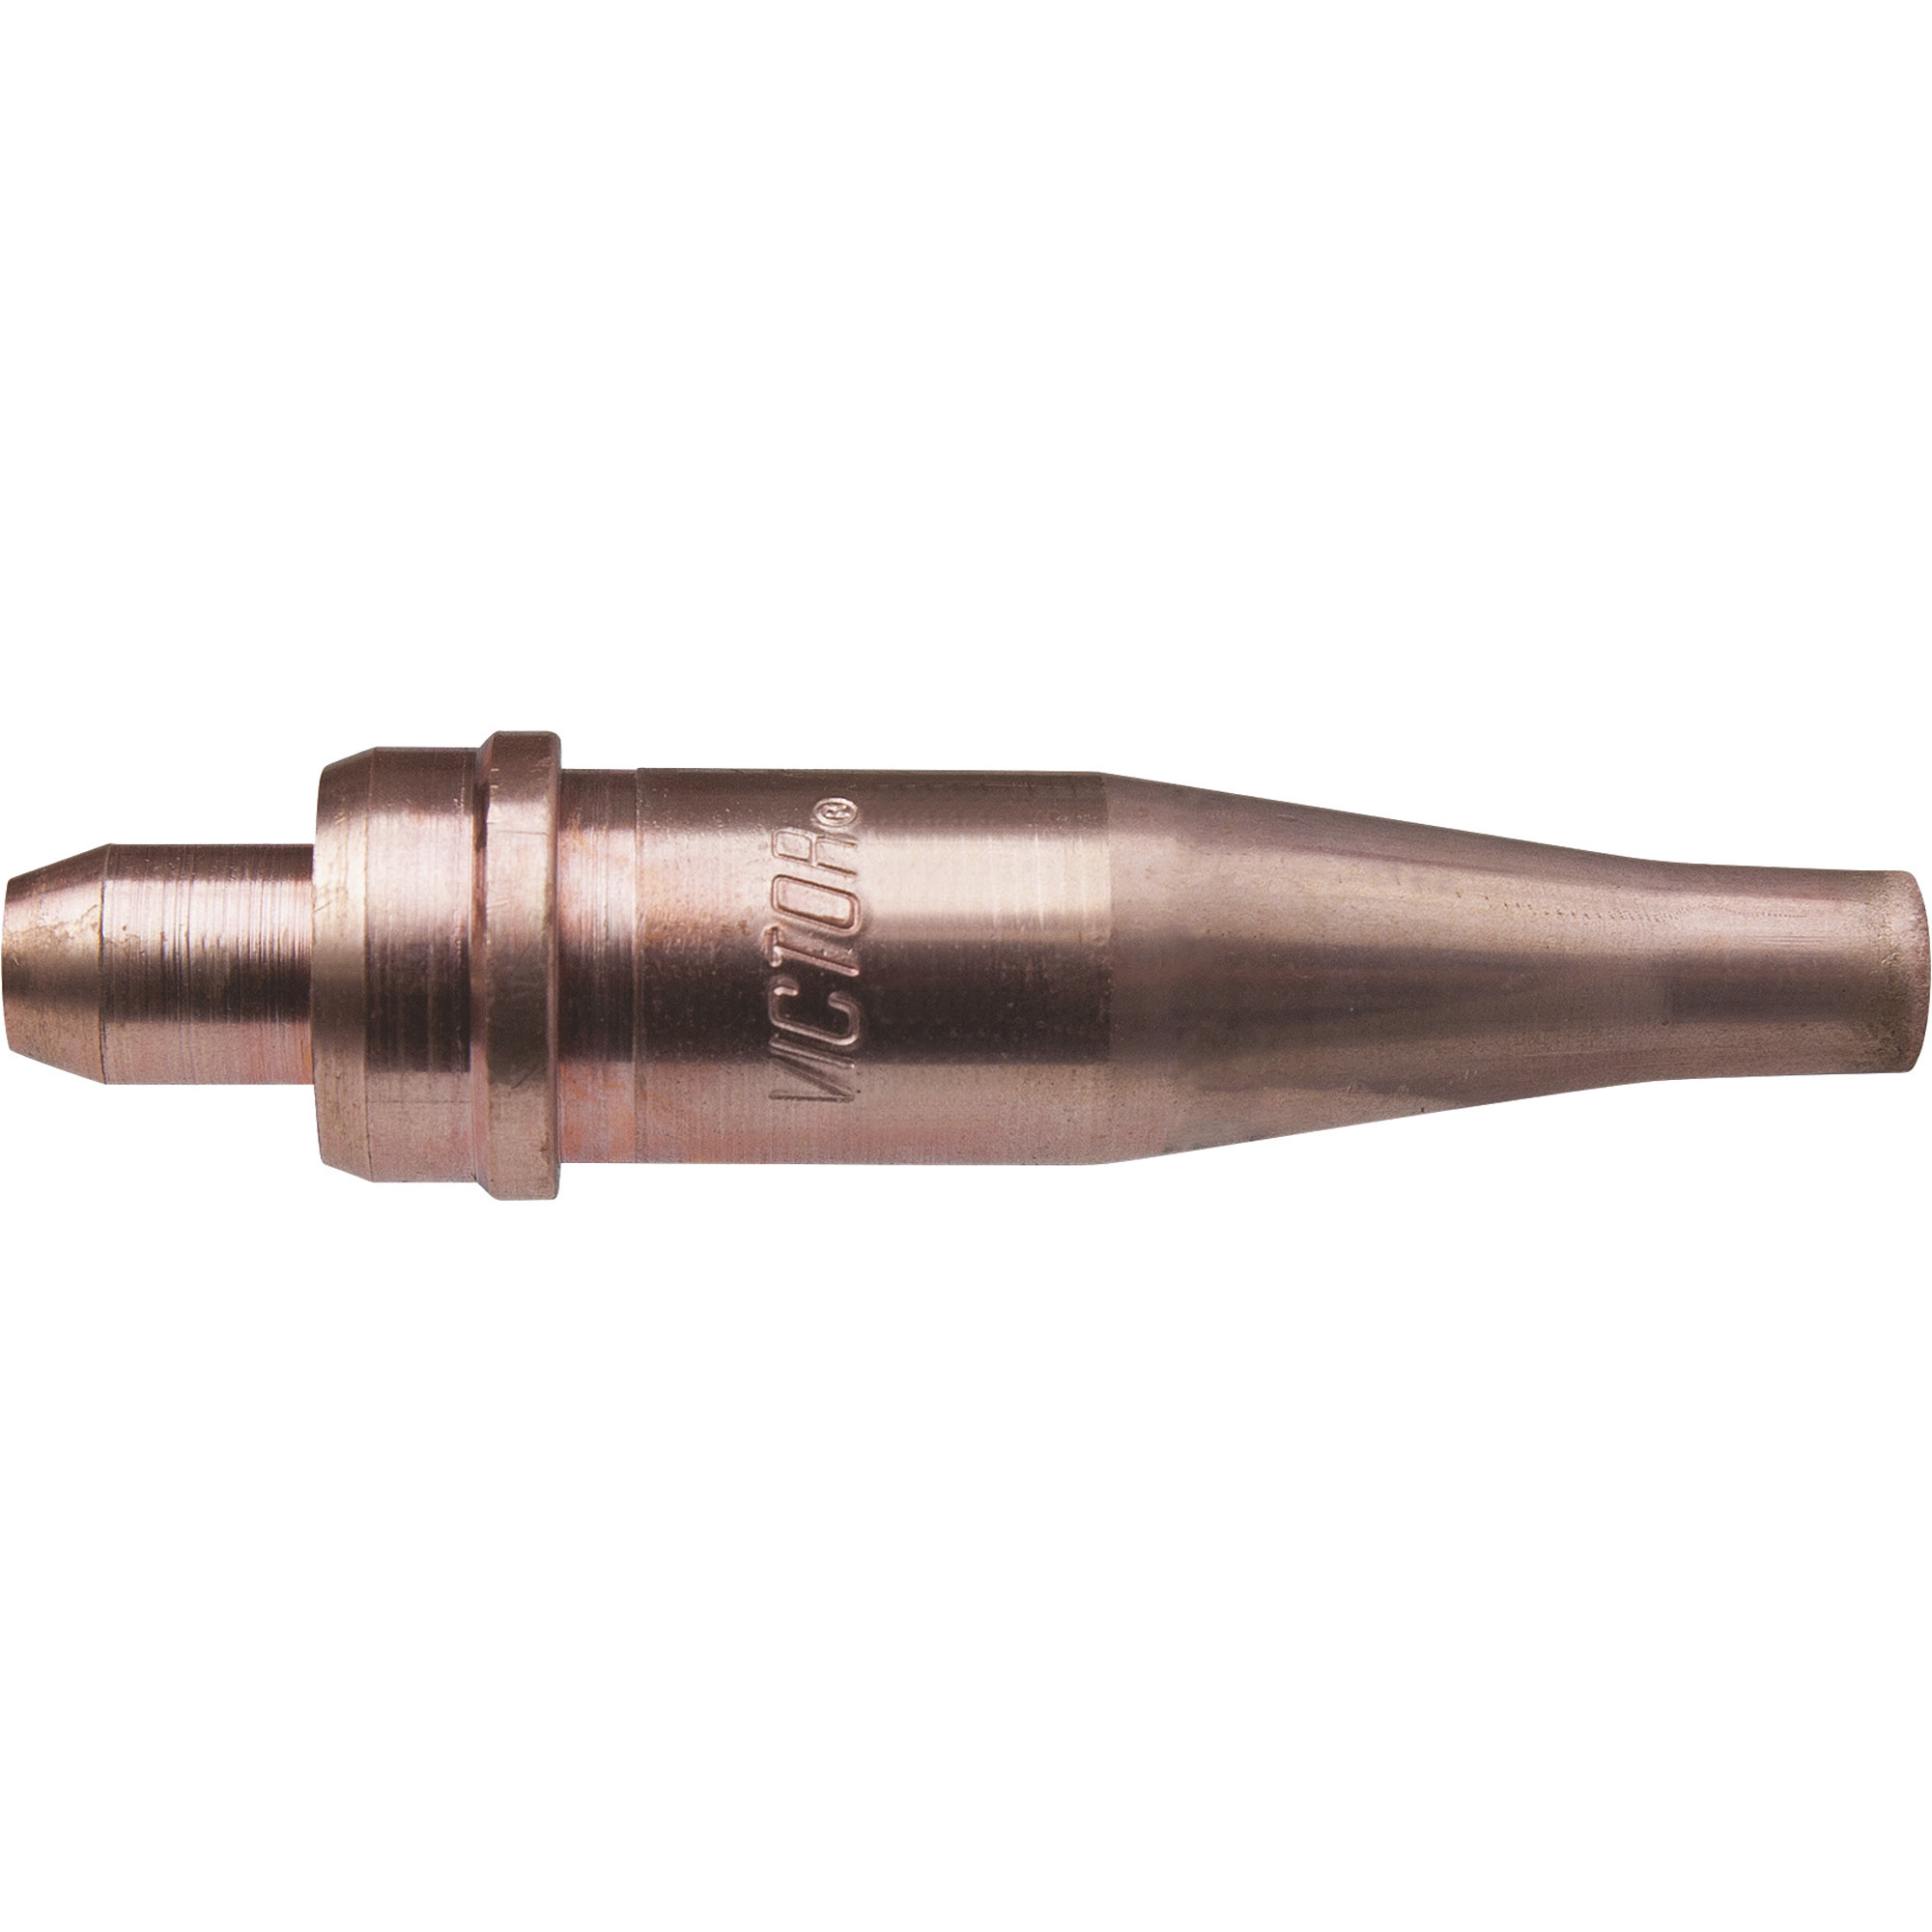 Acetylene Torch Cutting Tip — Acetylene, #1-101-00 (Victor-Style), Size 00, 1/2Inch, Model - Victor CutSkill CS110100